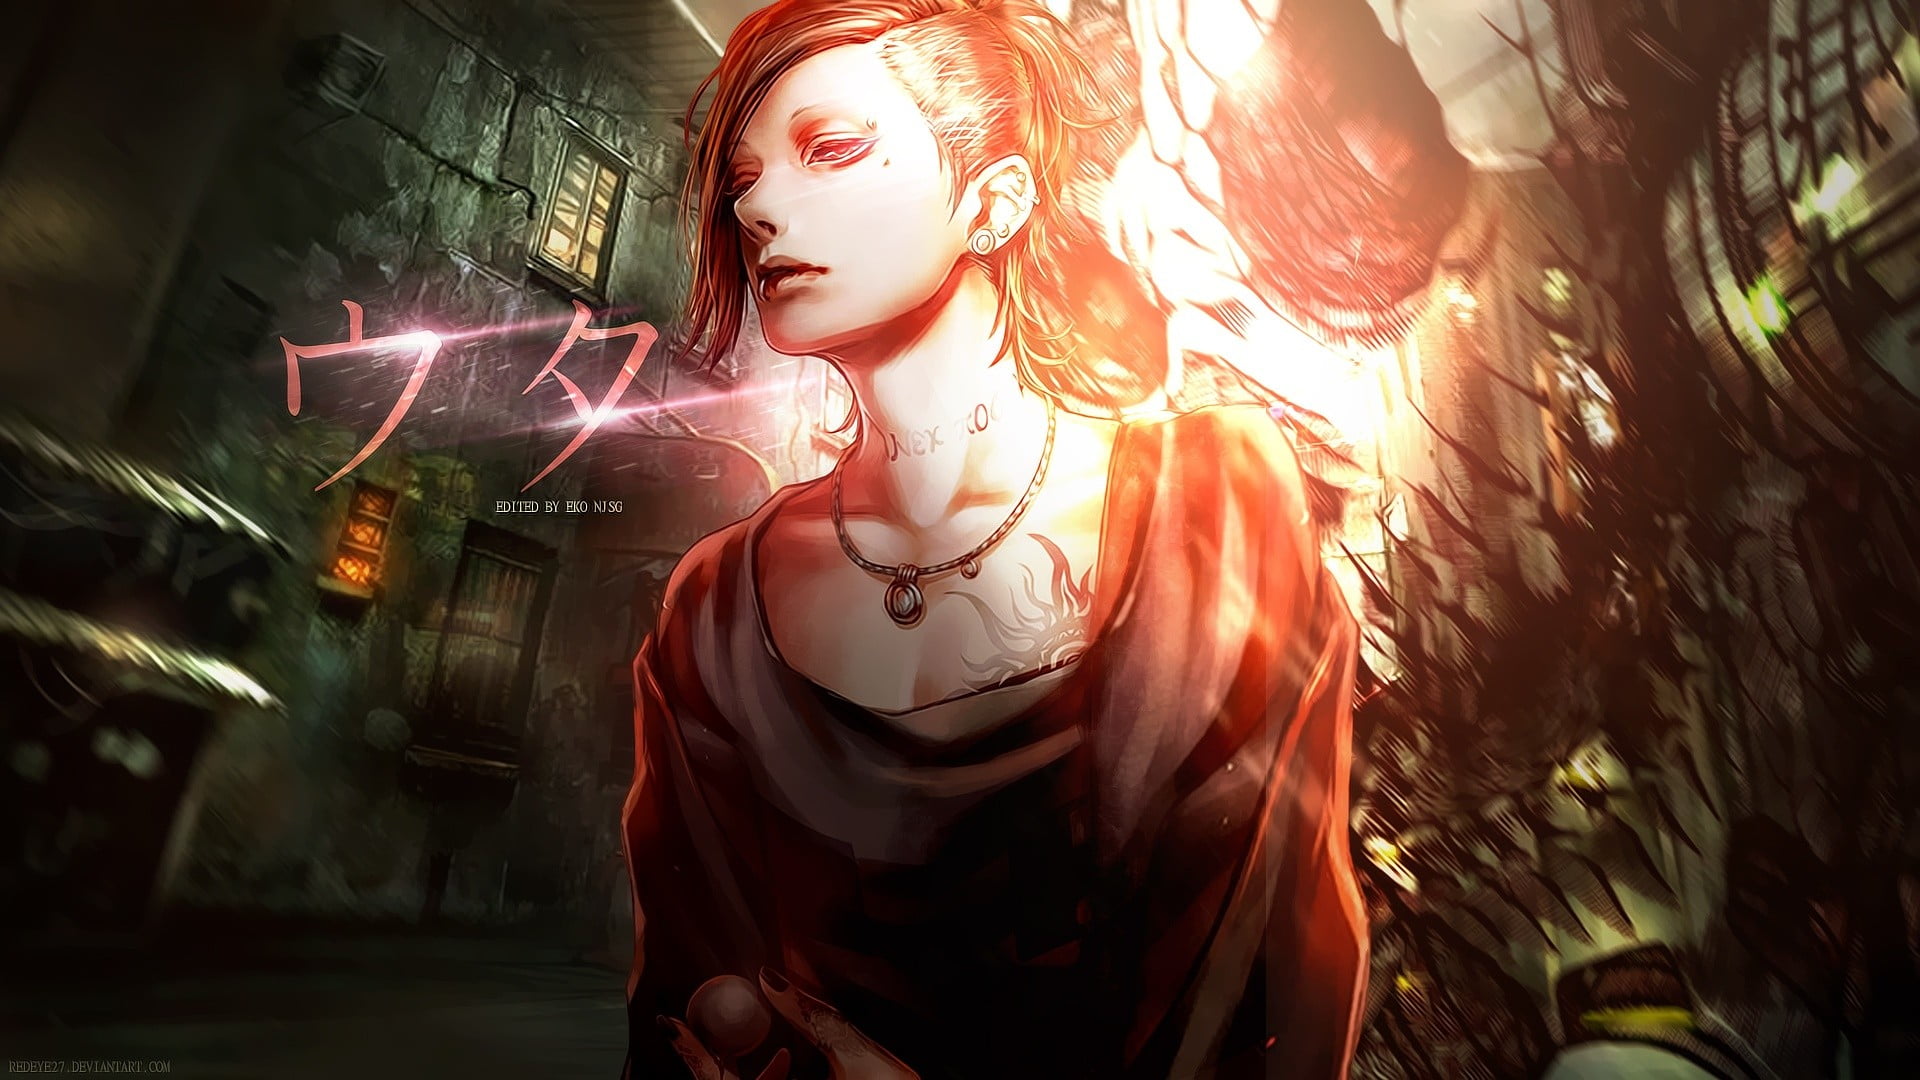 Female anime character illustration, anime, Tokyo Ghoul ...